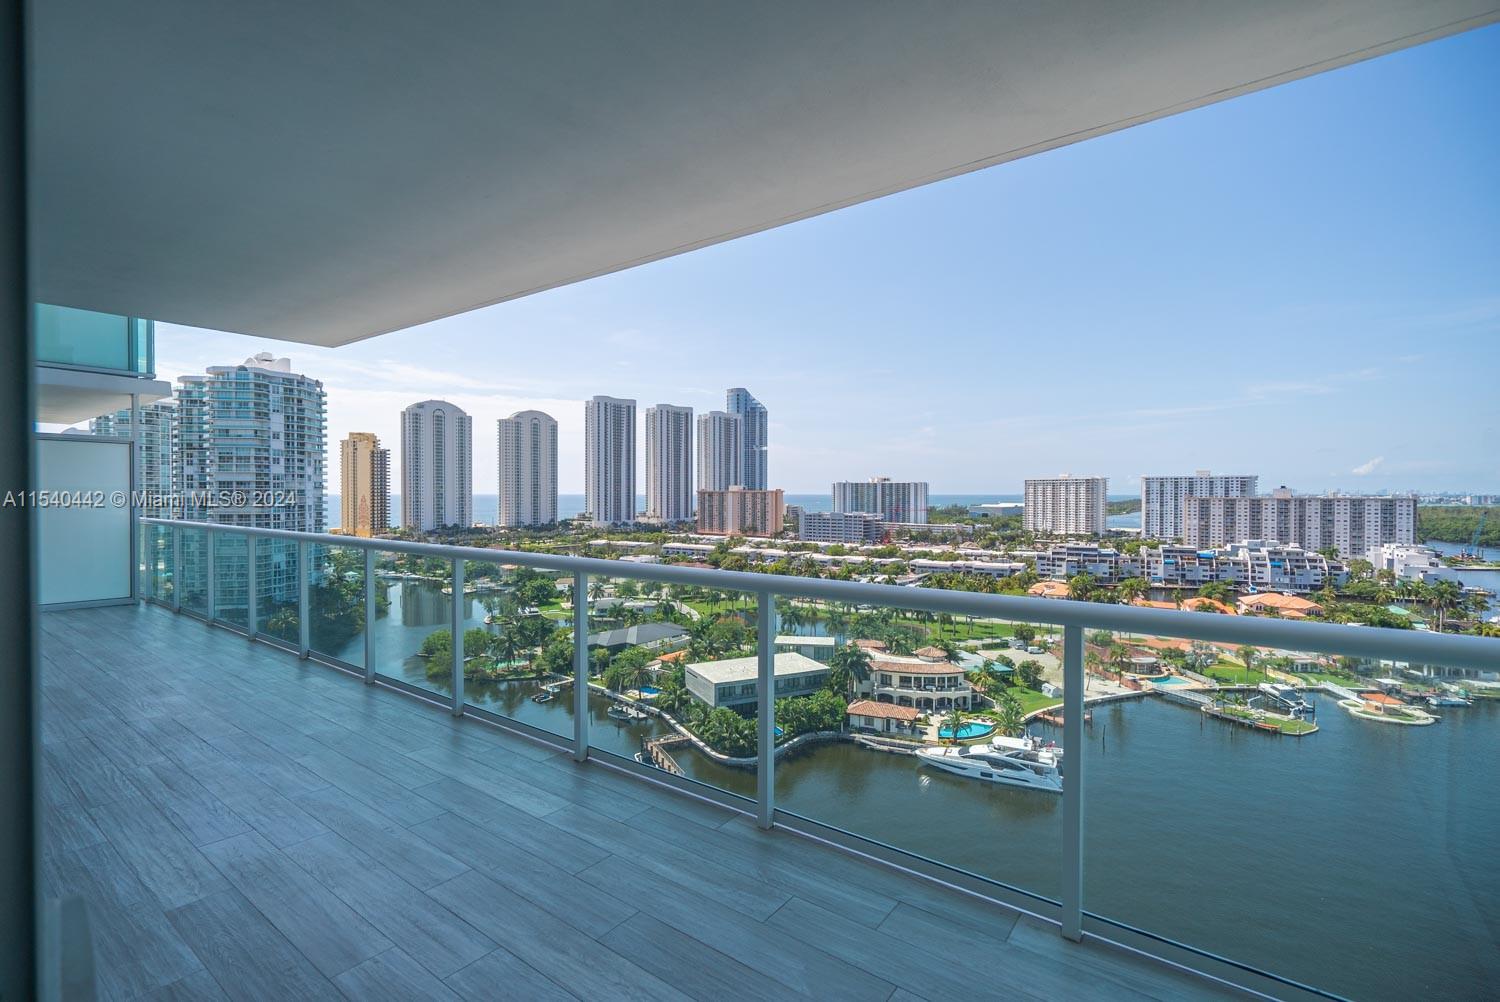 400 Sunny Isles Blvd 1721, Sunny Isles Beach, Florida 33160, 2 Bedrooms Bedrooms, ,3 BathroomsBathrooms,Residentiallease,For Rent,400 Sunny Isles Blvd 1721,A11540442